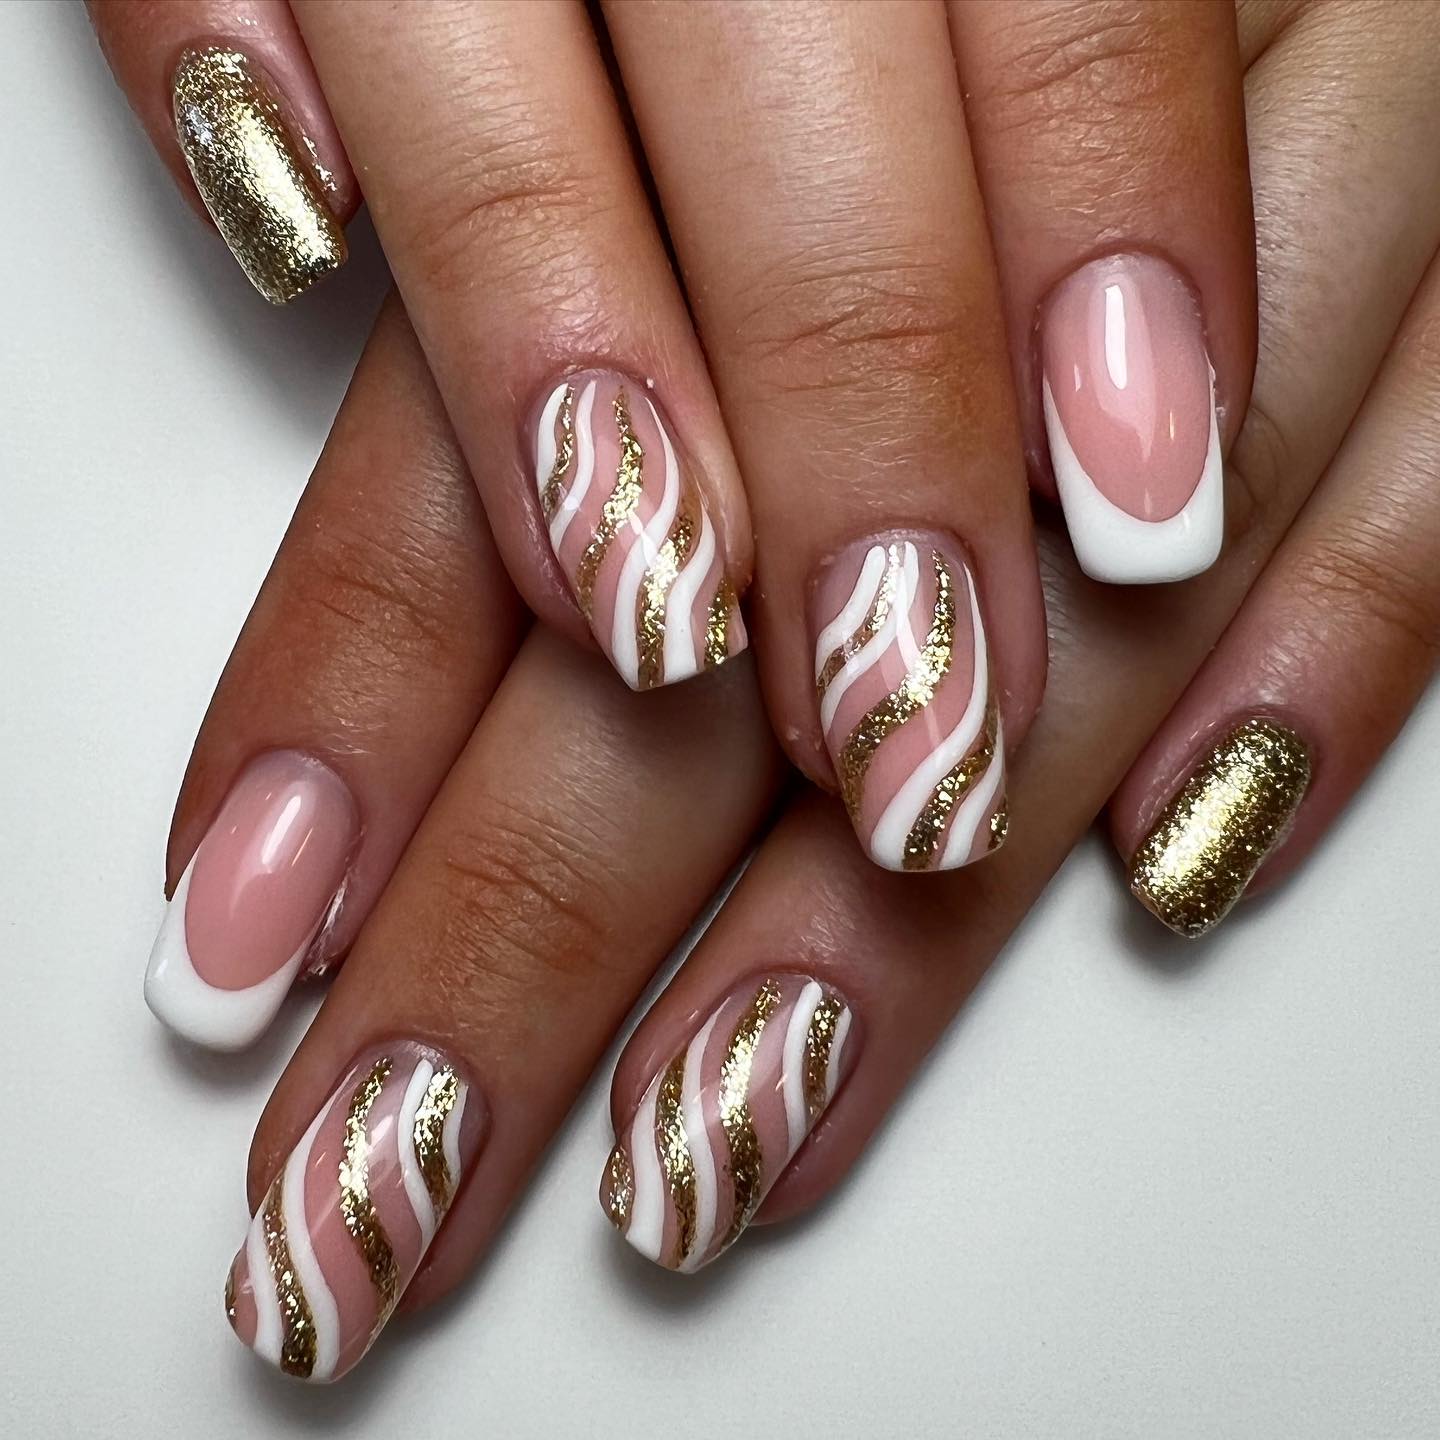 If you are a person who likes too much of everything, a detailed swirl nail art is for you. These white and gold glitter dense swirls will be enough to show your characteristics to everyone.